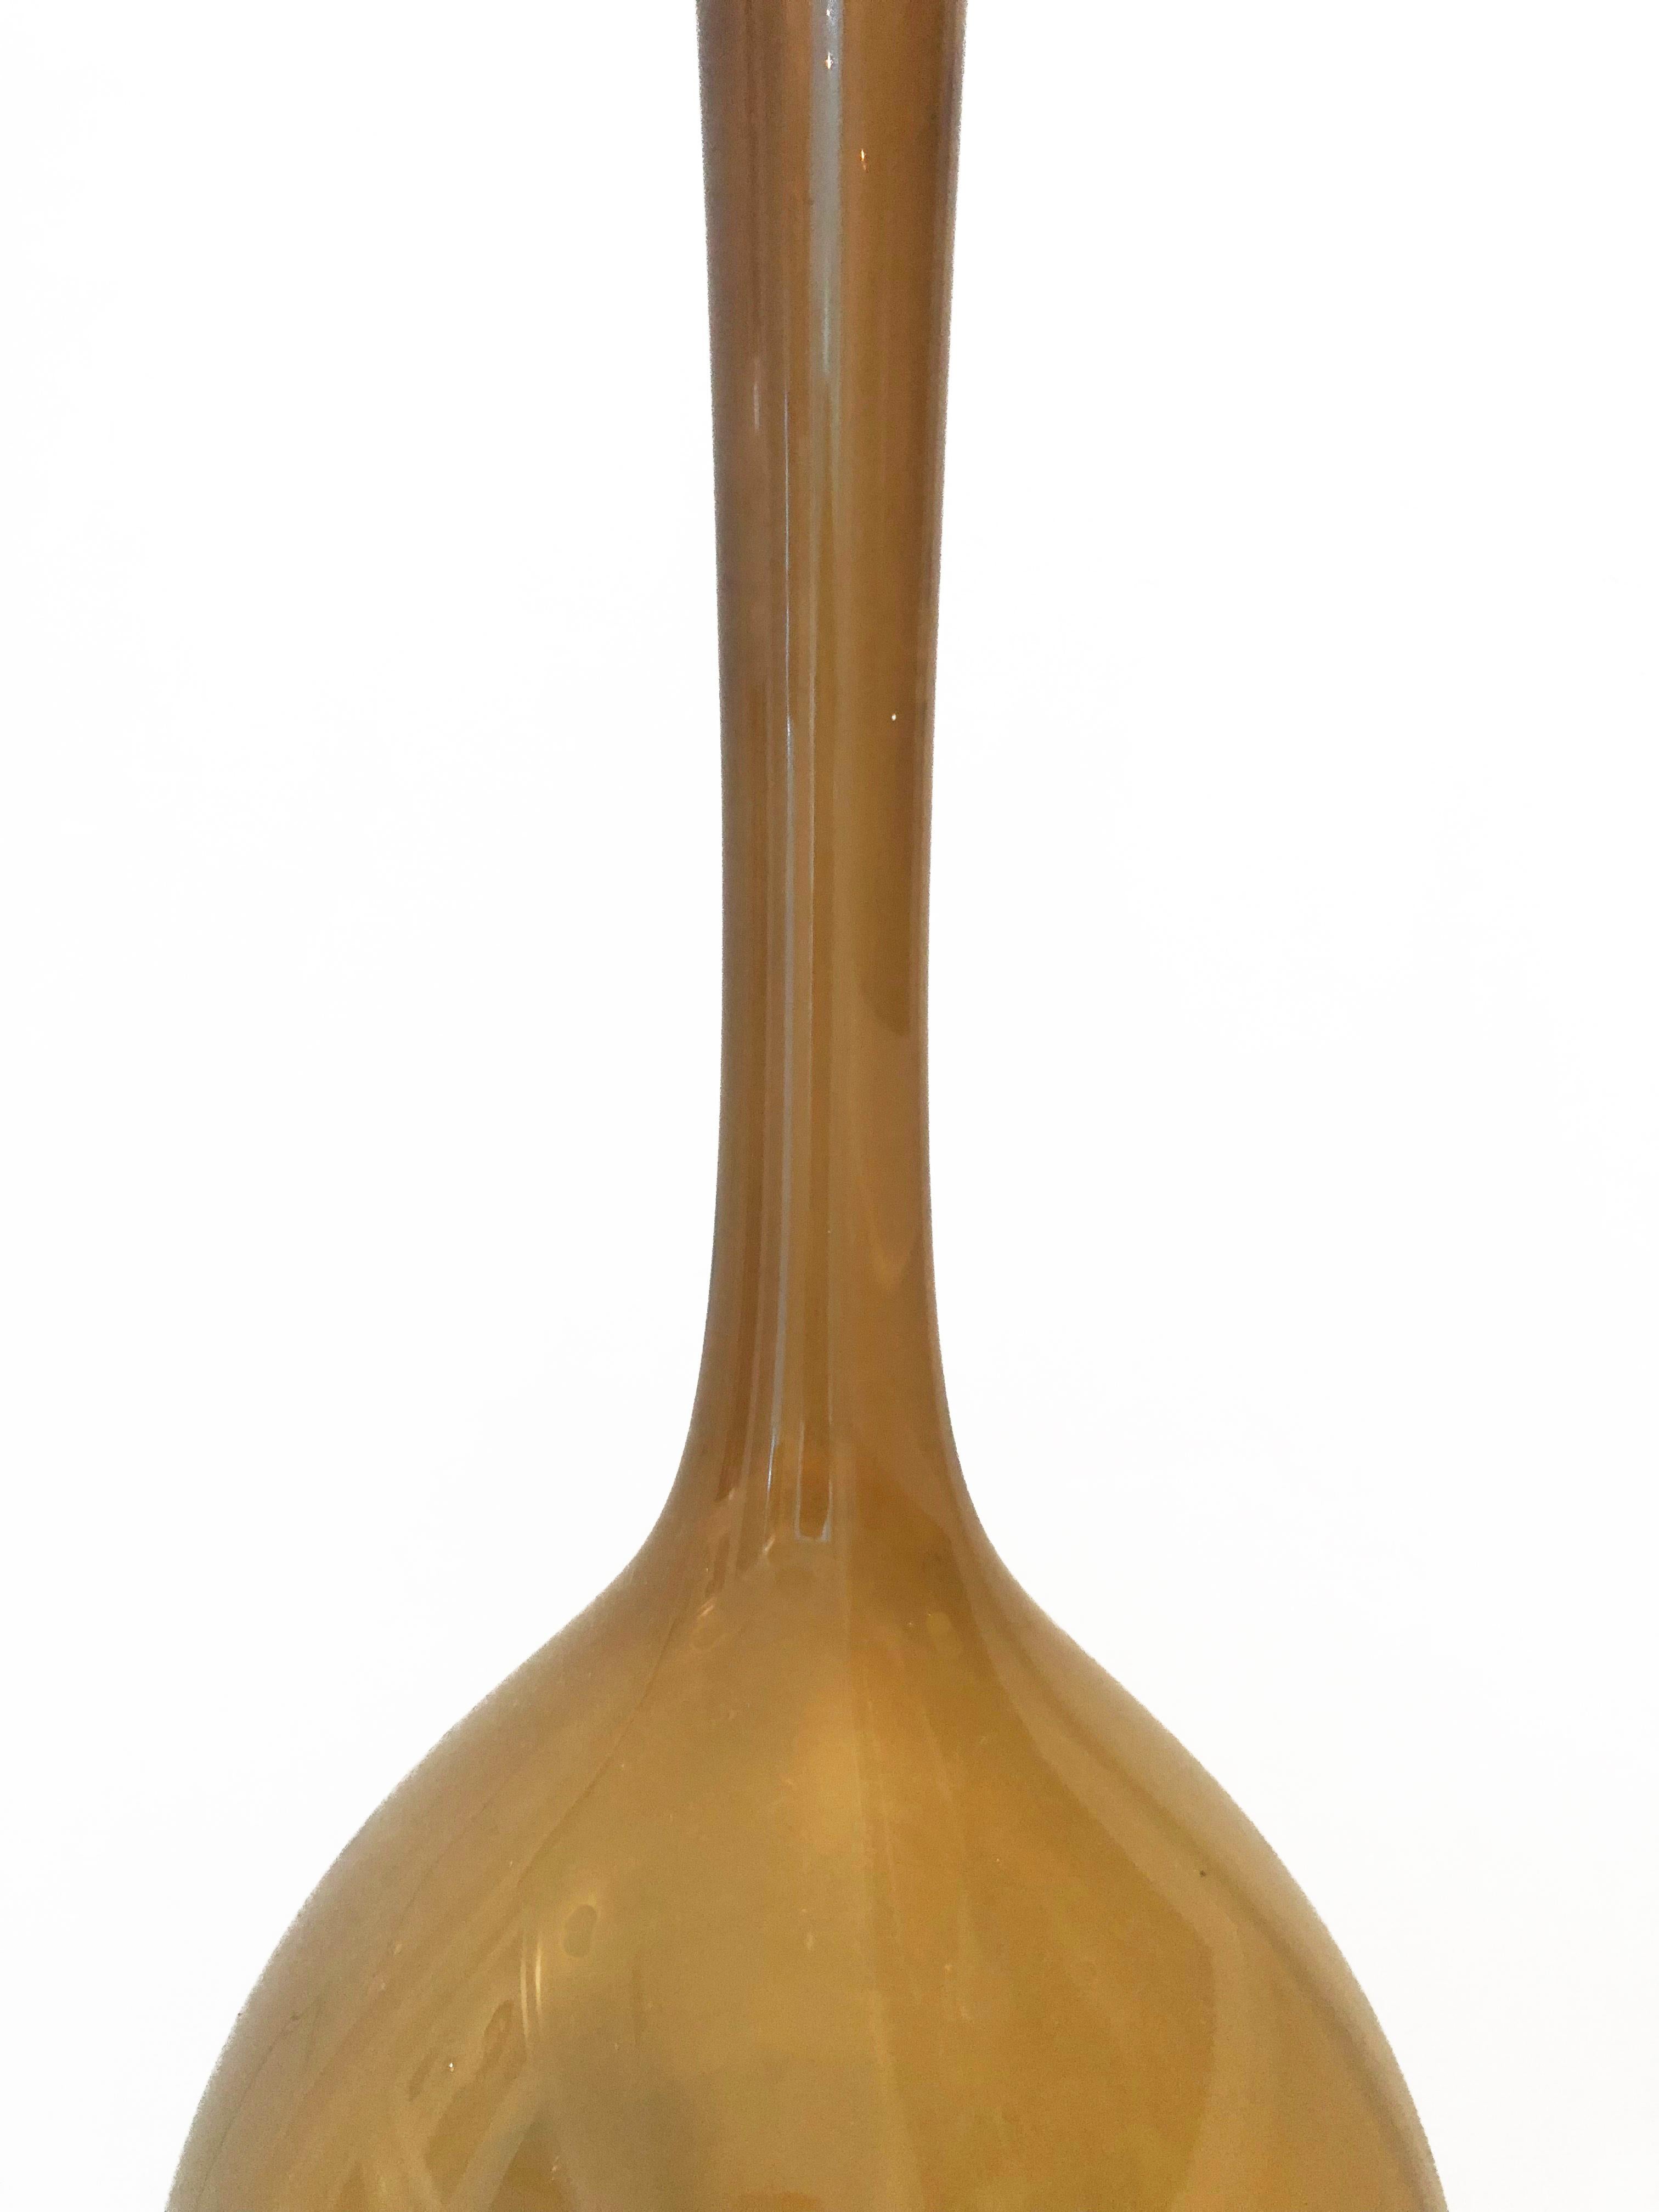 Swedish Mid-Century Modern Gorgeous amber bulbous thin glass-bottle vase made by Arthur Percy for Aseda Gullaskruf of Sweden. 
The body is of teardrop form with an elongated slightly flaring neck.
     